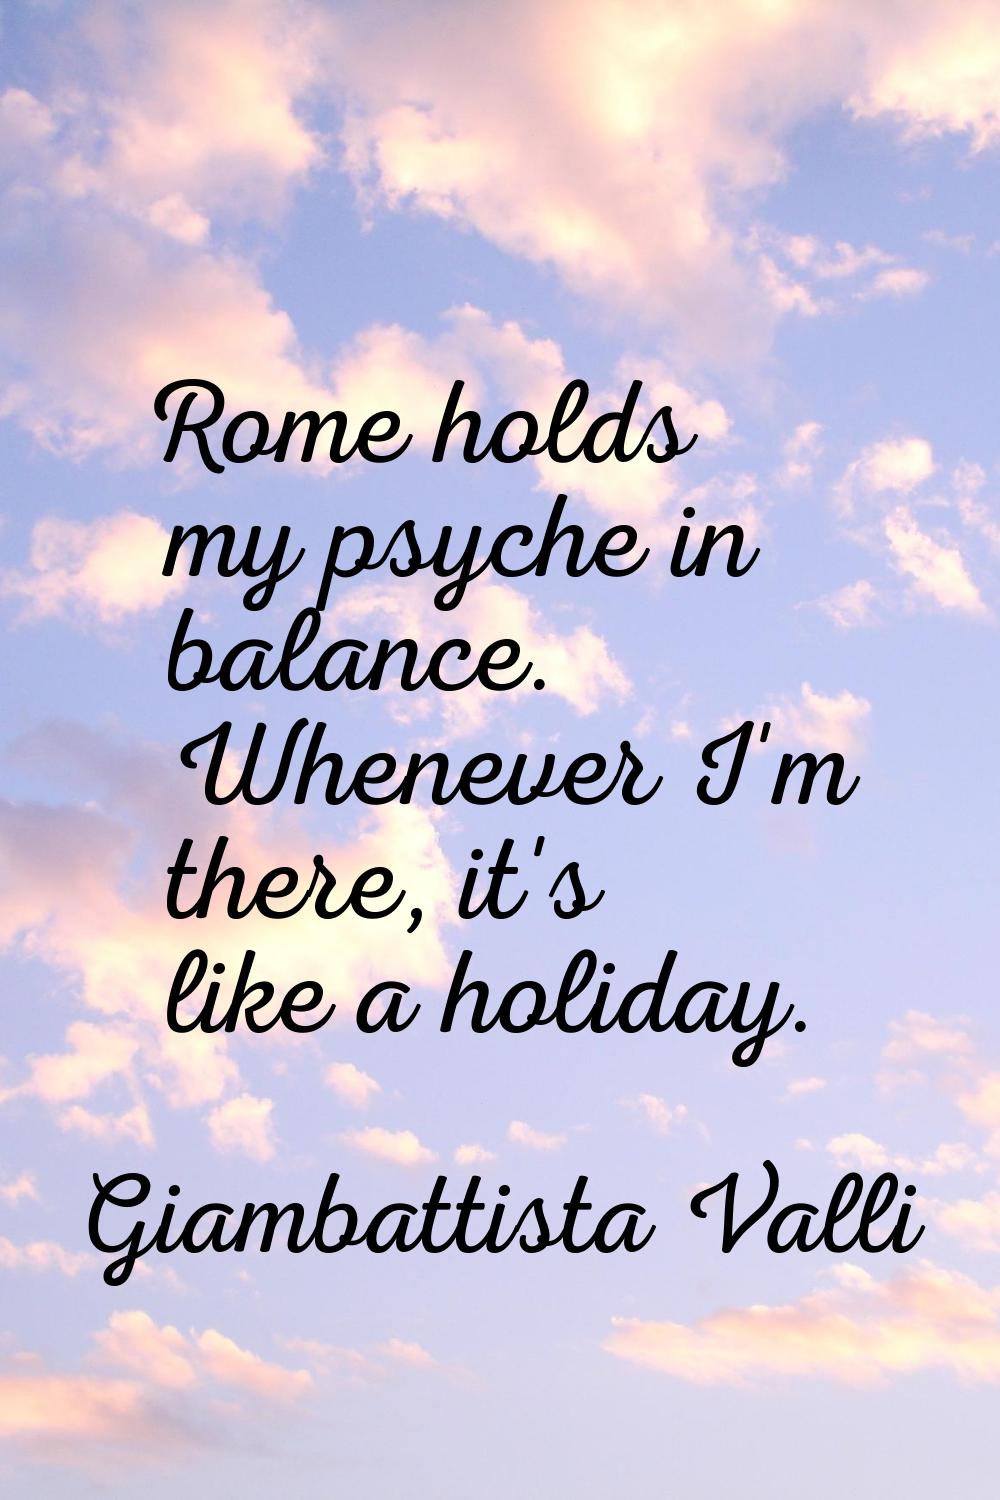 Rome holds my psyche in balance. Whenever I'm there, it's like a holiday.